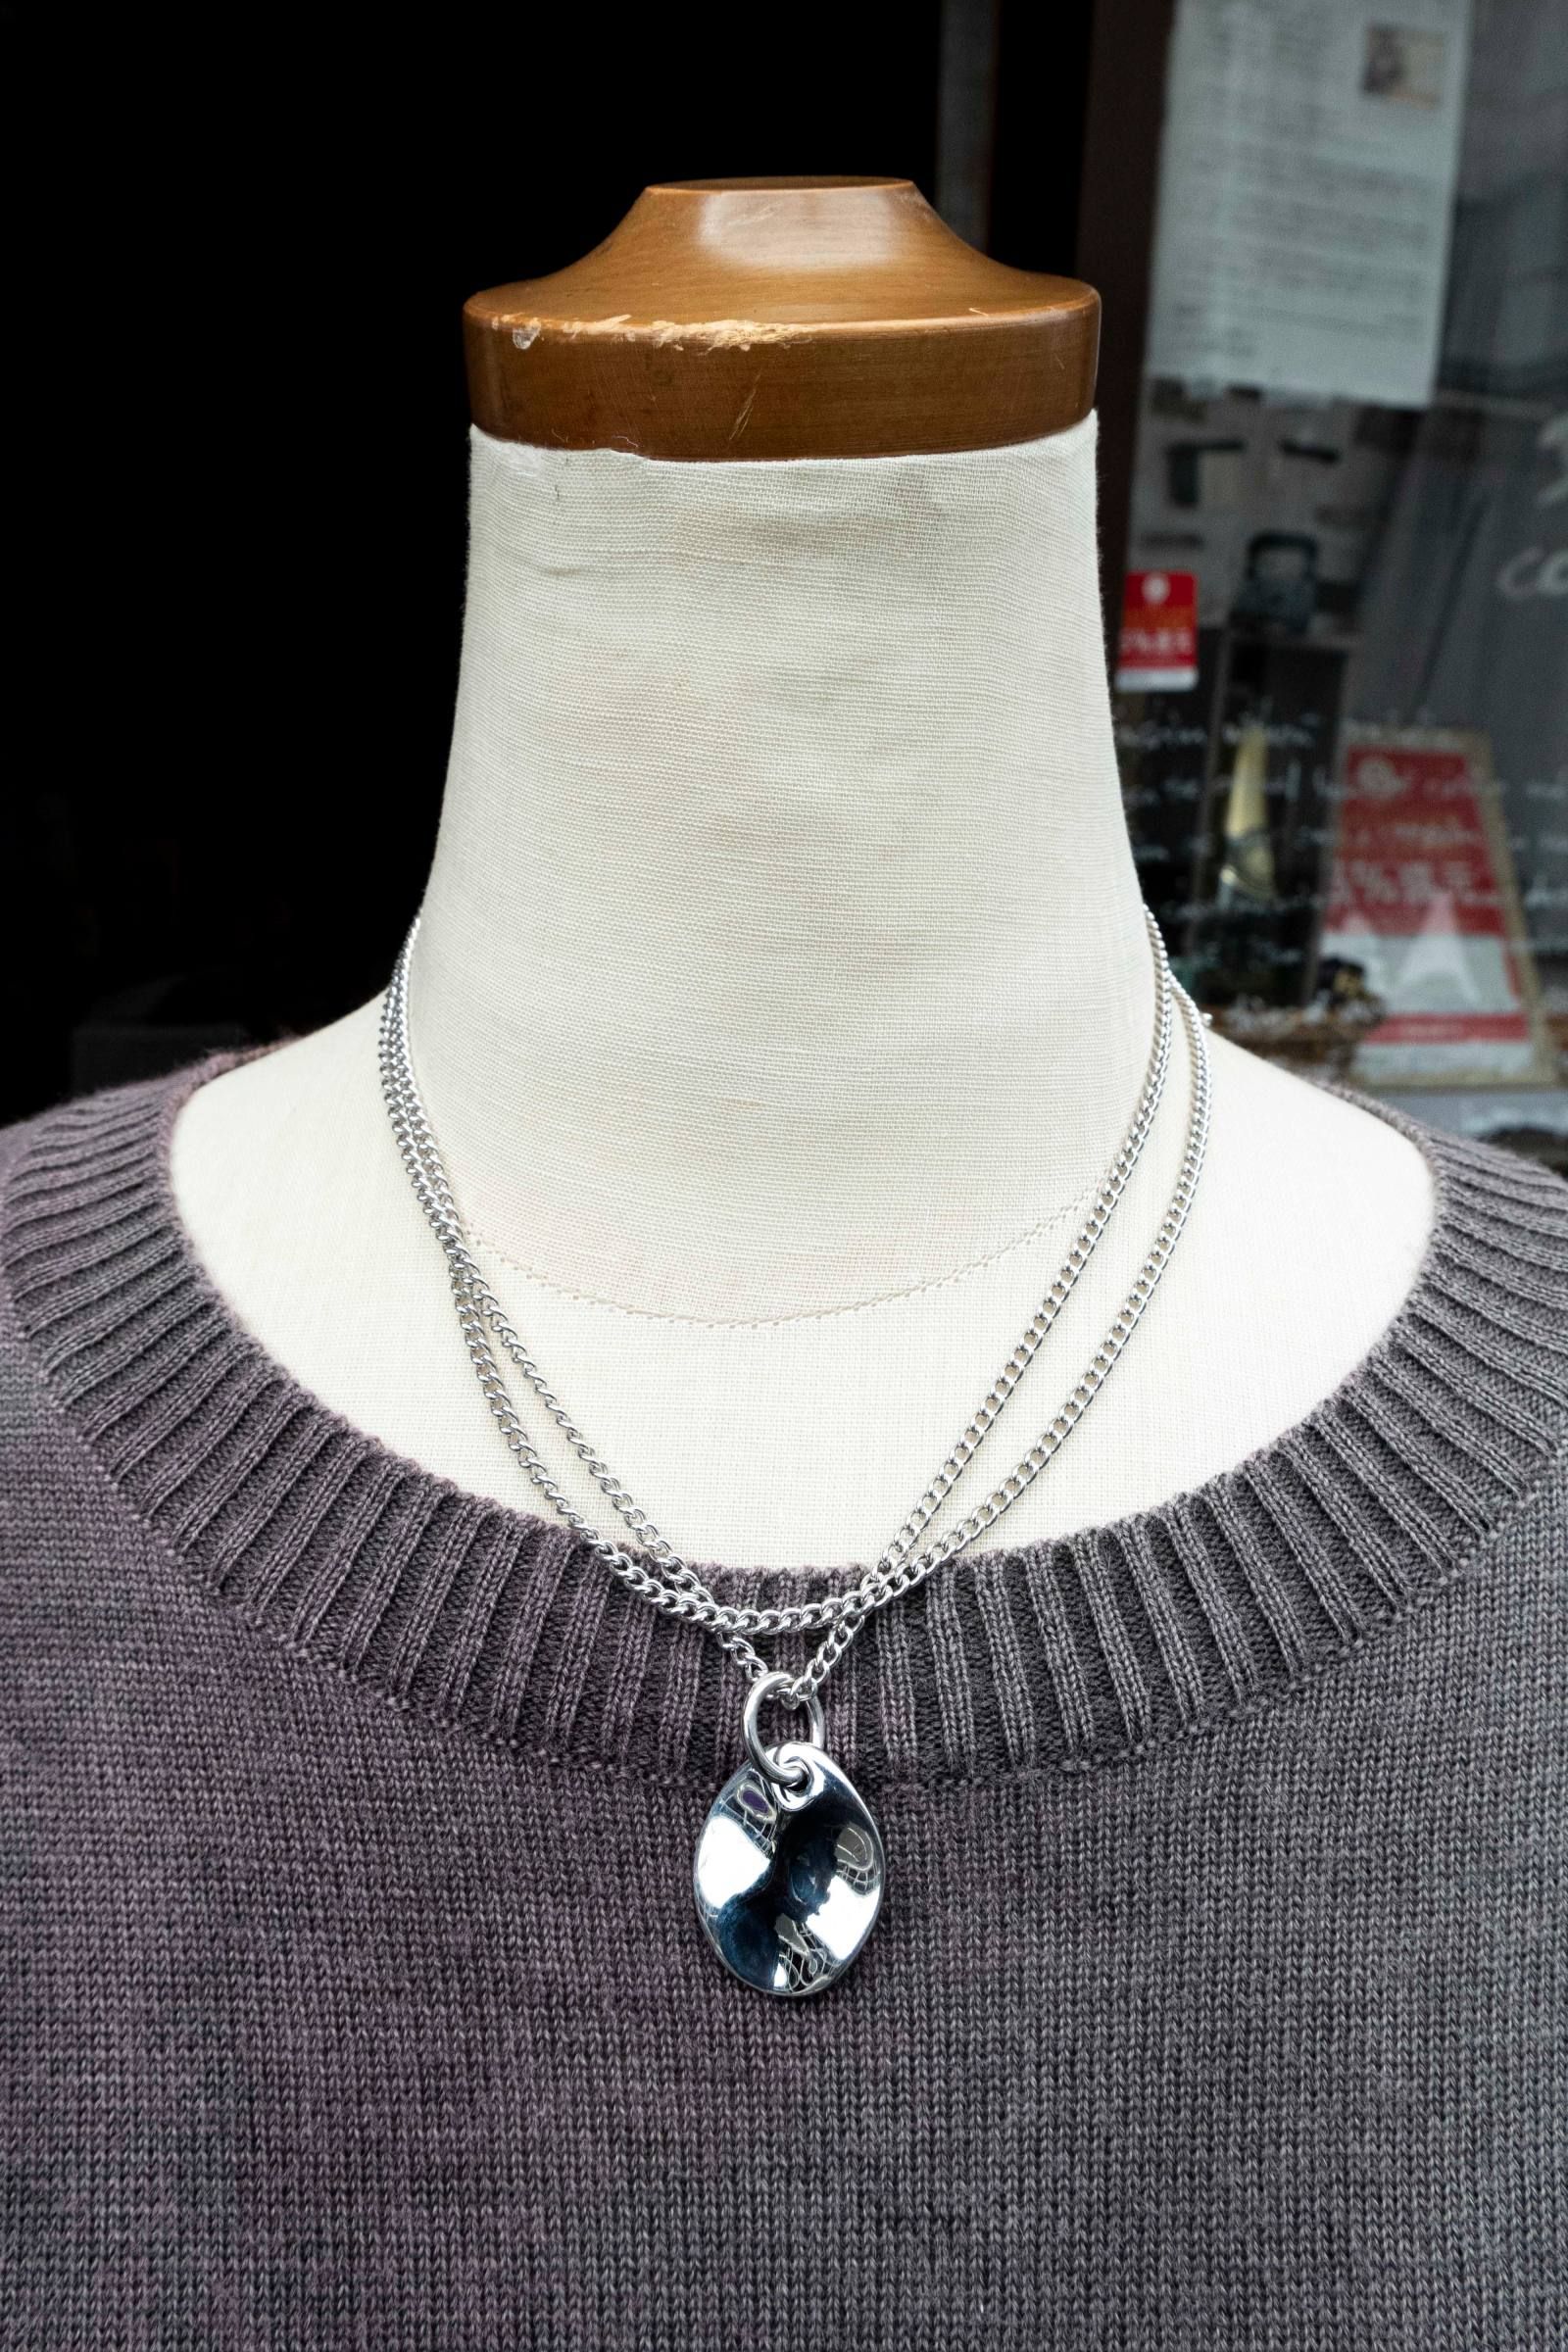 SnowMan目黒蓮氏着用】MIRAH - N103 ネックレス silver925 necklace RP